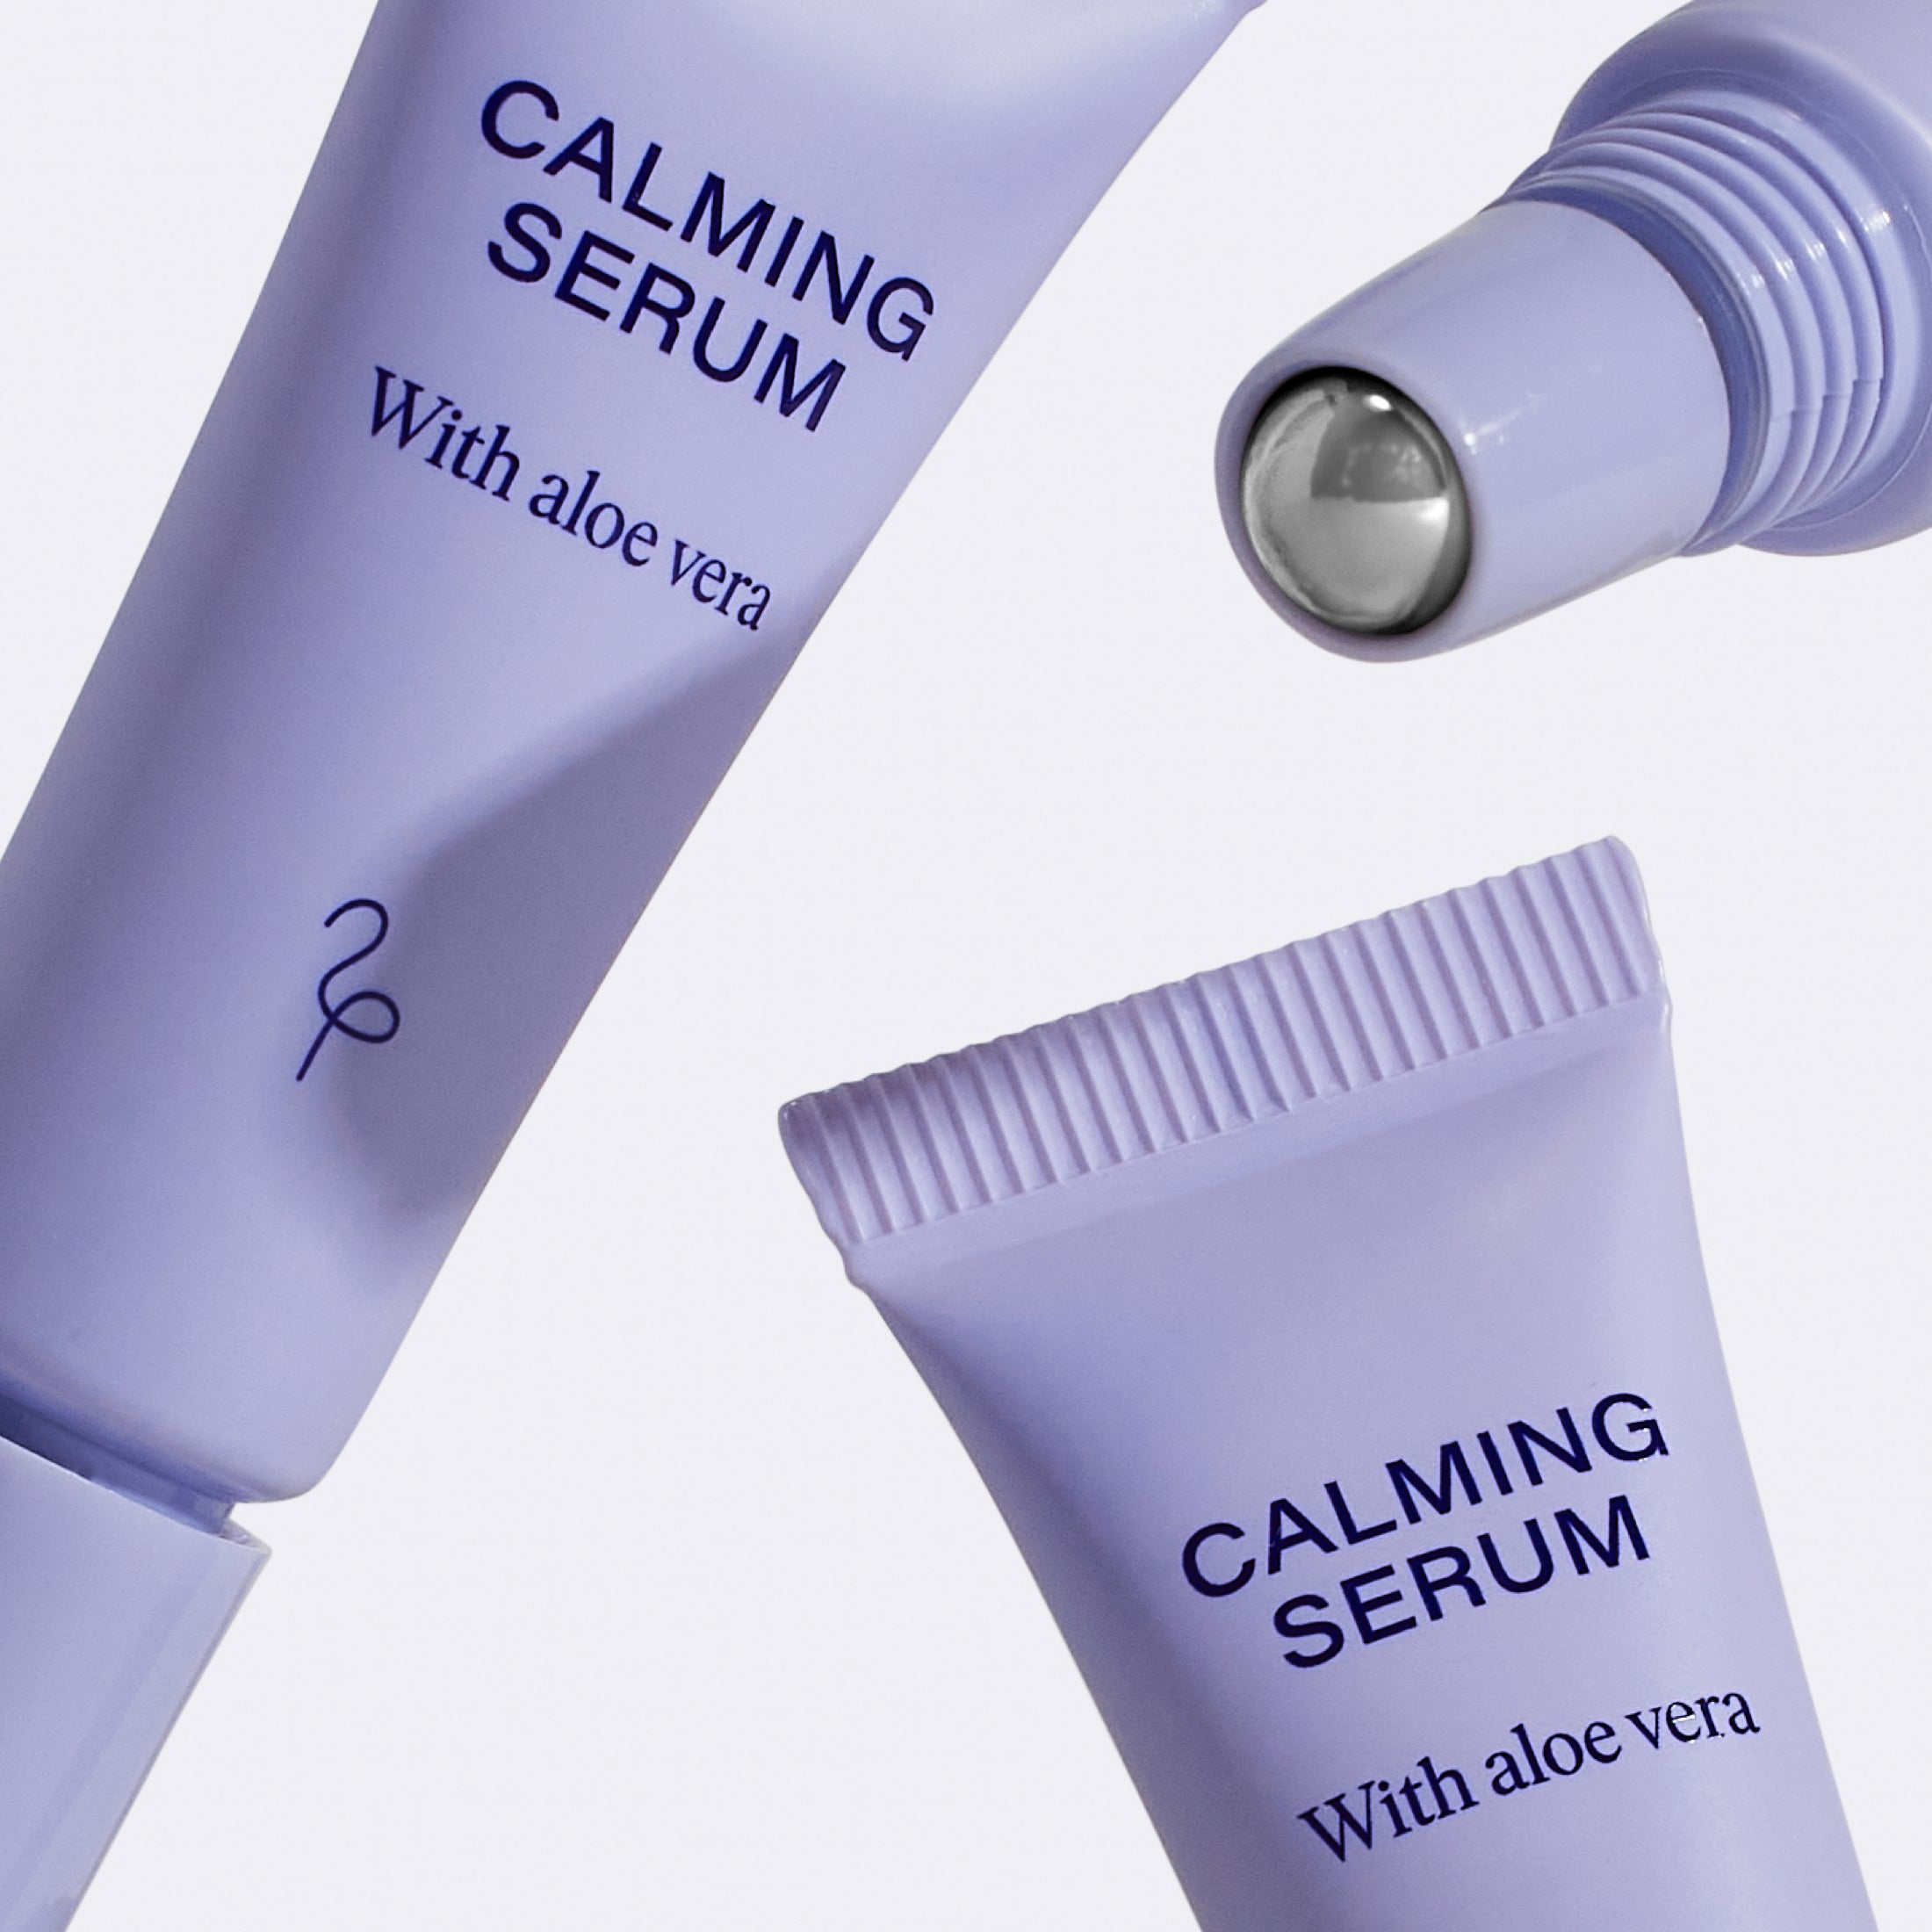 Close up three Flamingo Calming Serums showcasing the stainless steel rollerball applicator